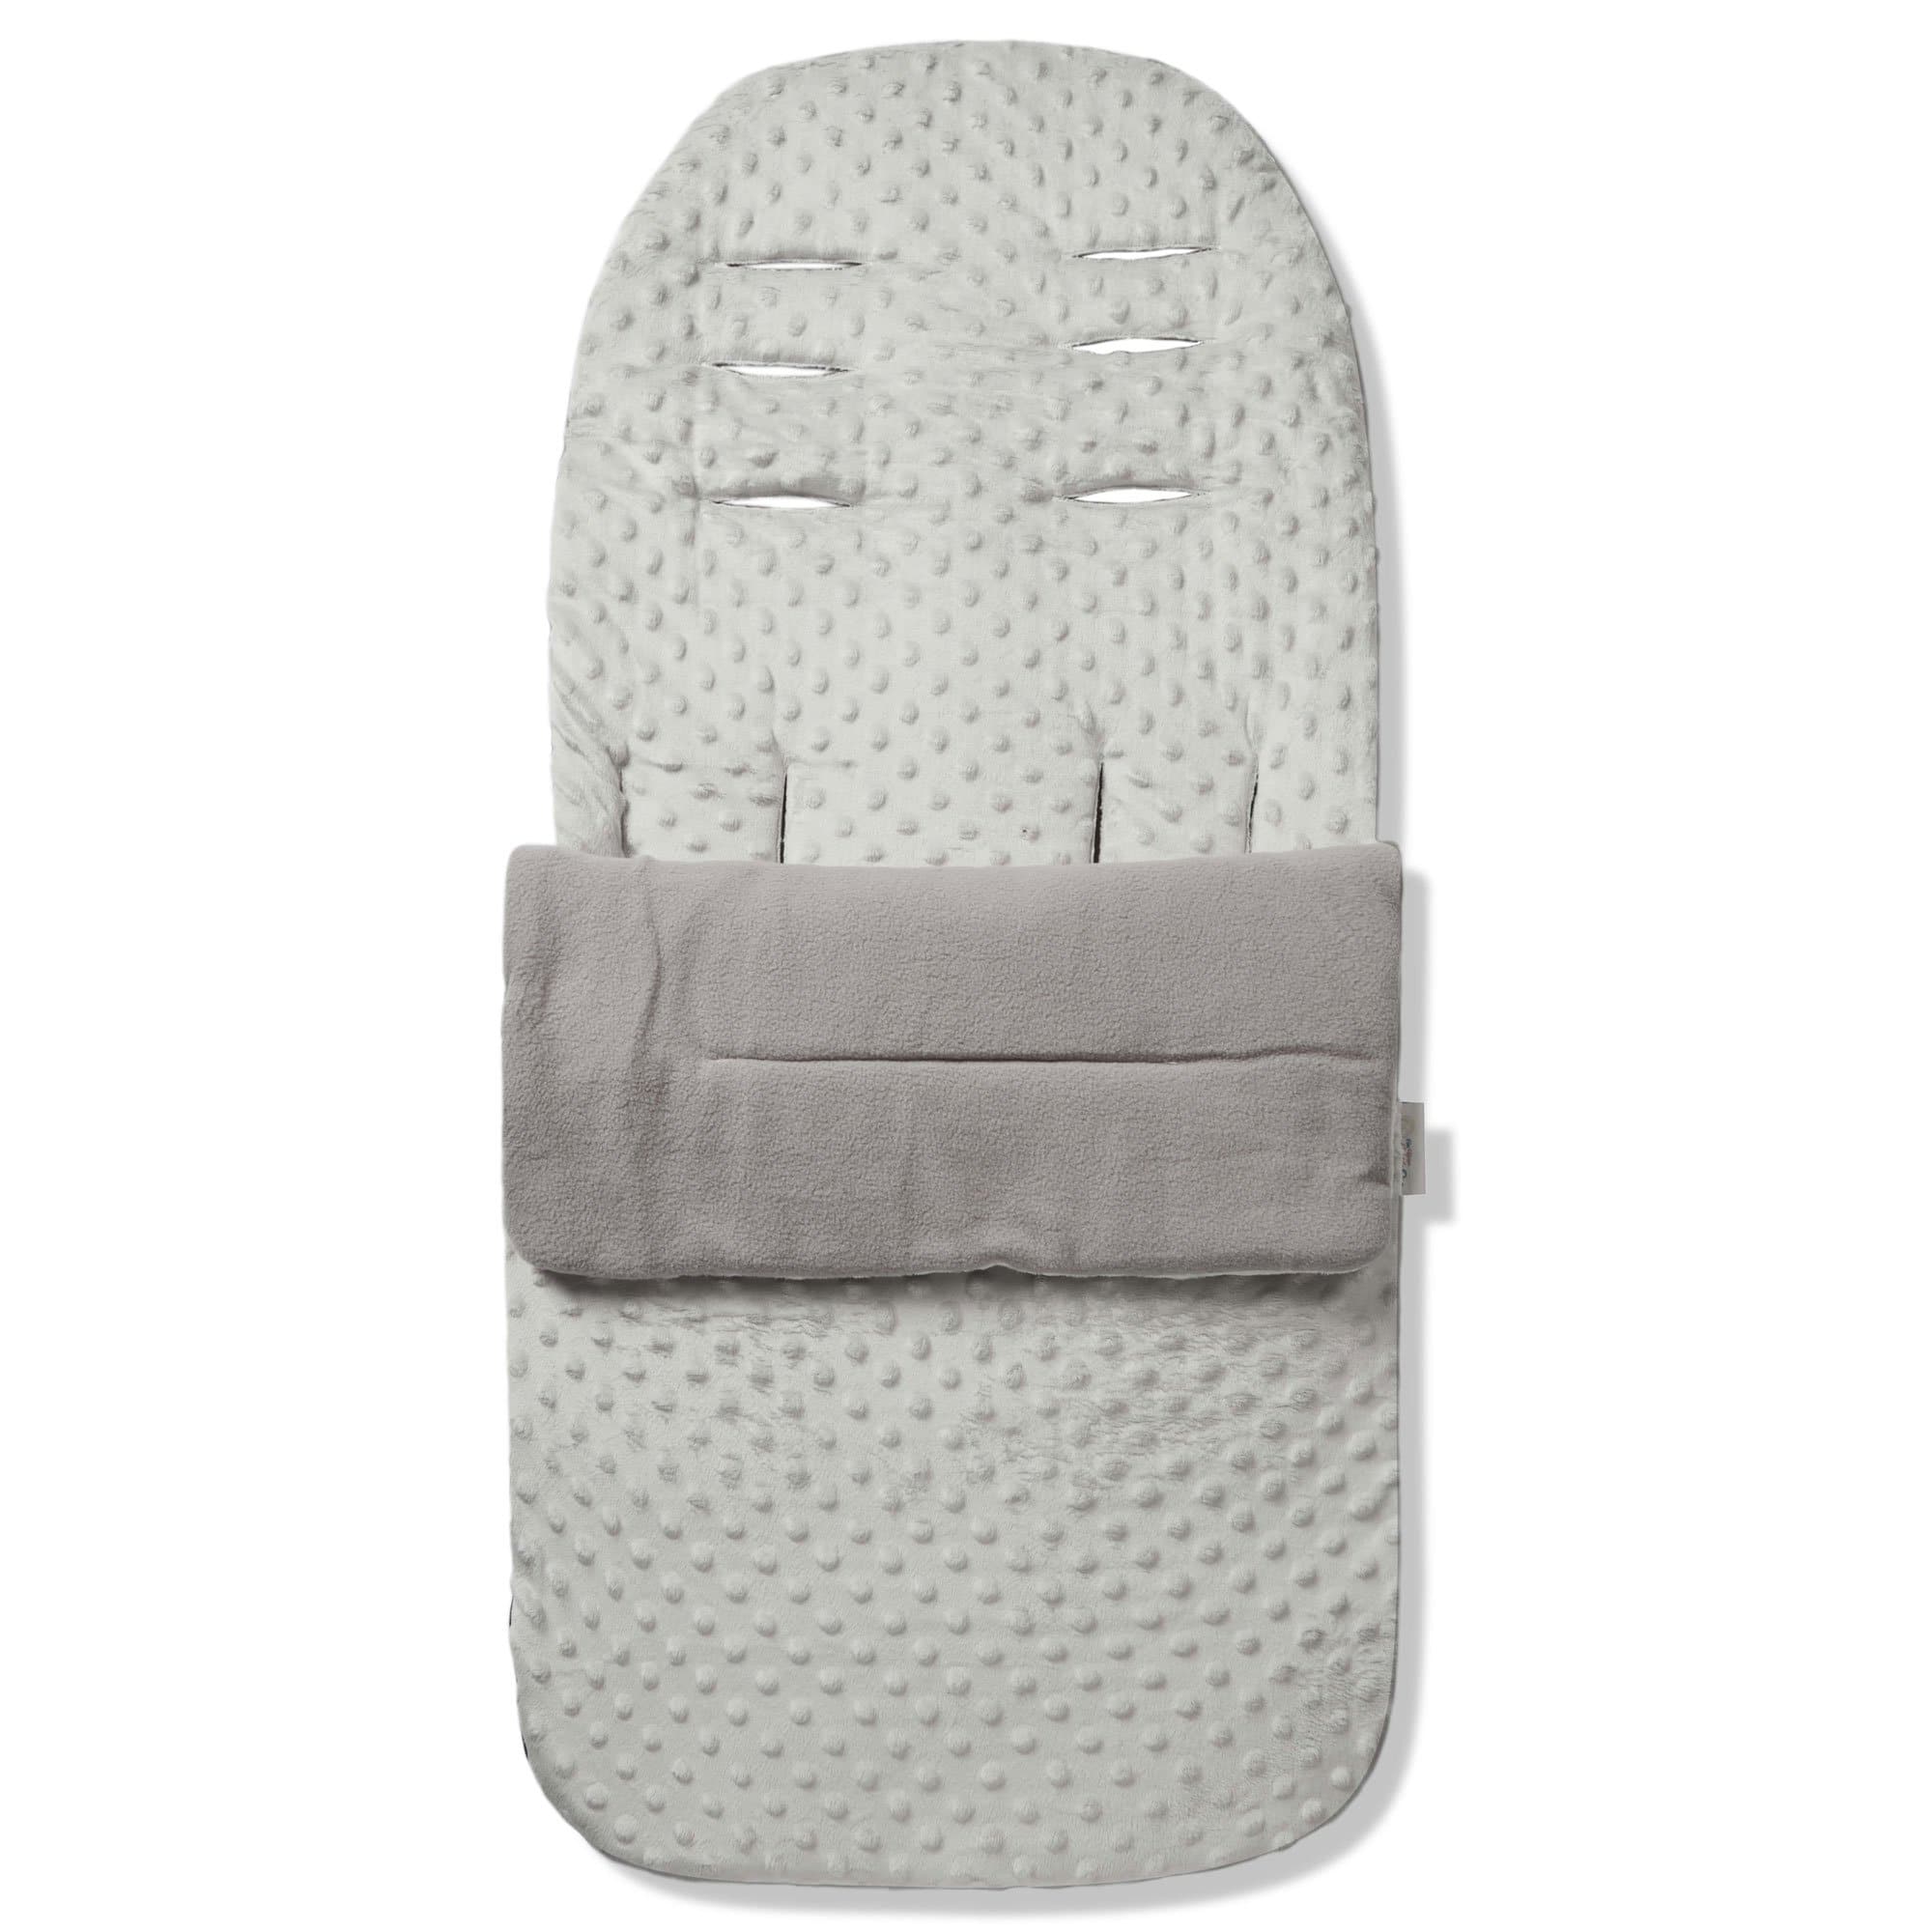 Dimple Footmuff / Cosy Toes Compatible with Orbit Baby - Grey / Fits All Models | For Your Little One